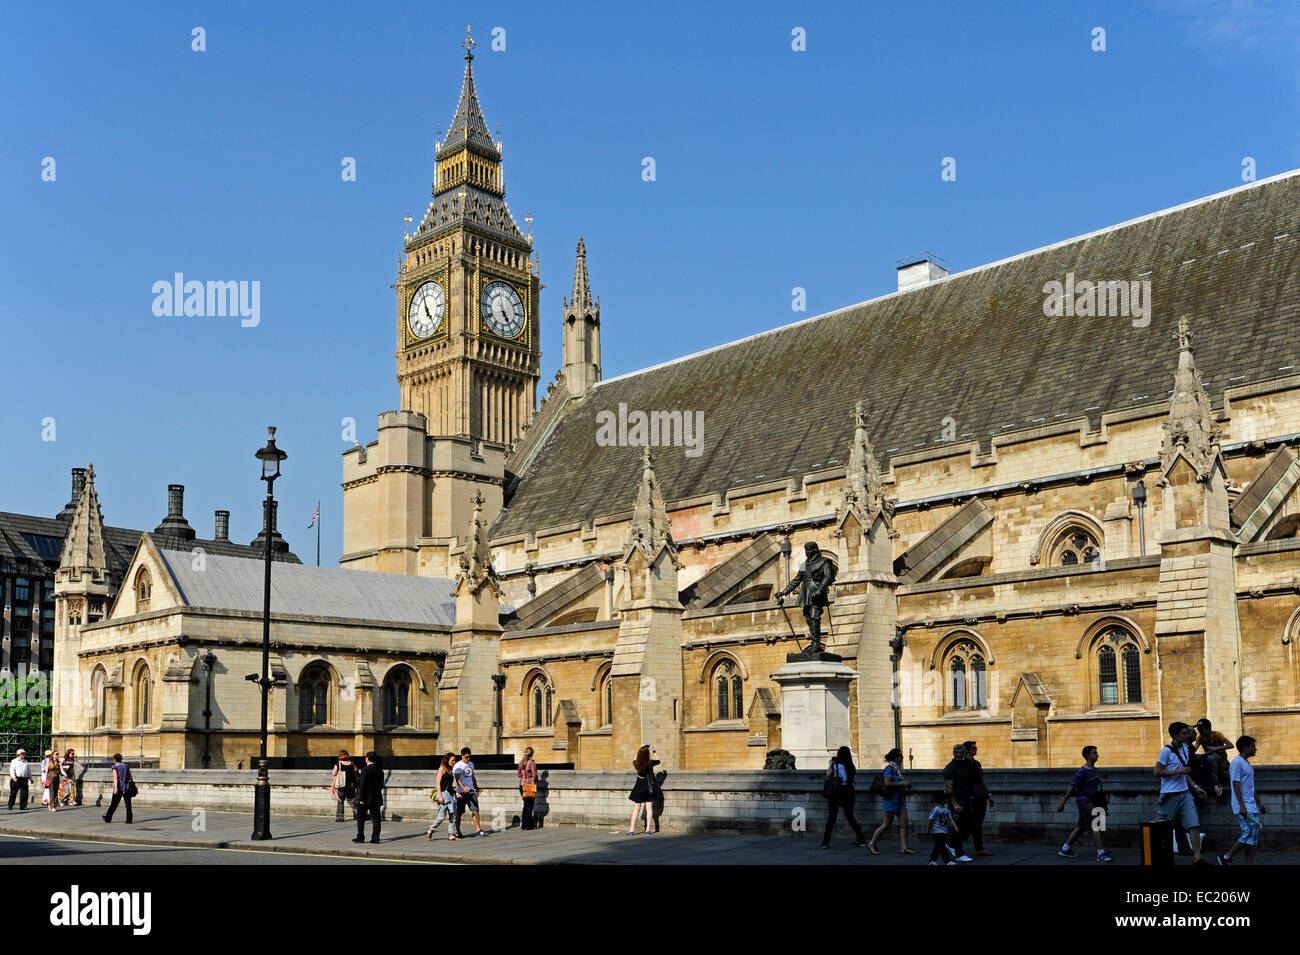 Big Ben, Elizabeth Tower, Palace of Westminster, Houses of Parliament, UNESCO World Cultural Heritage site, London, England Stock Photo